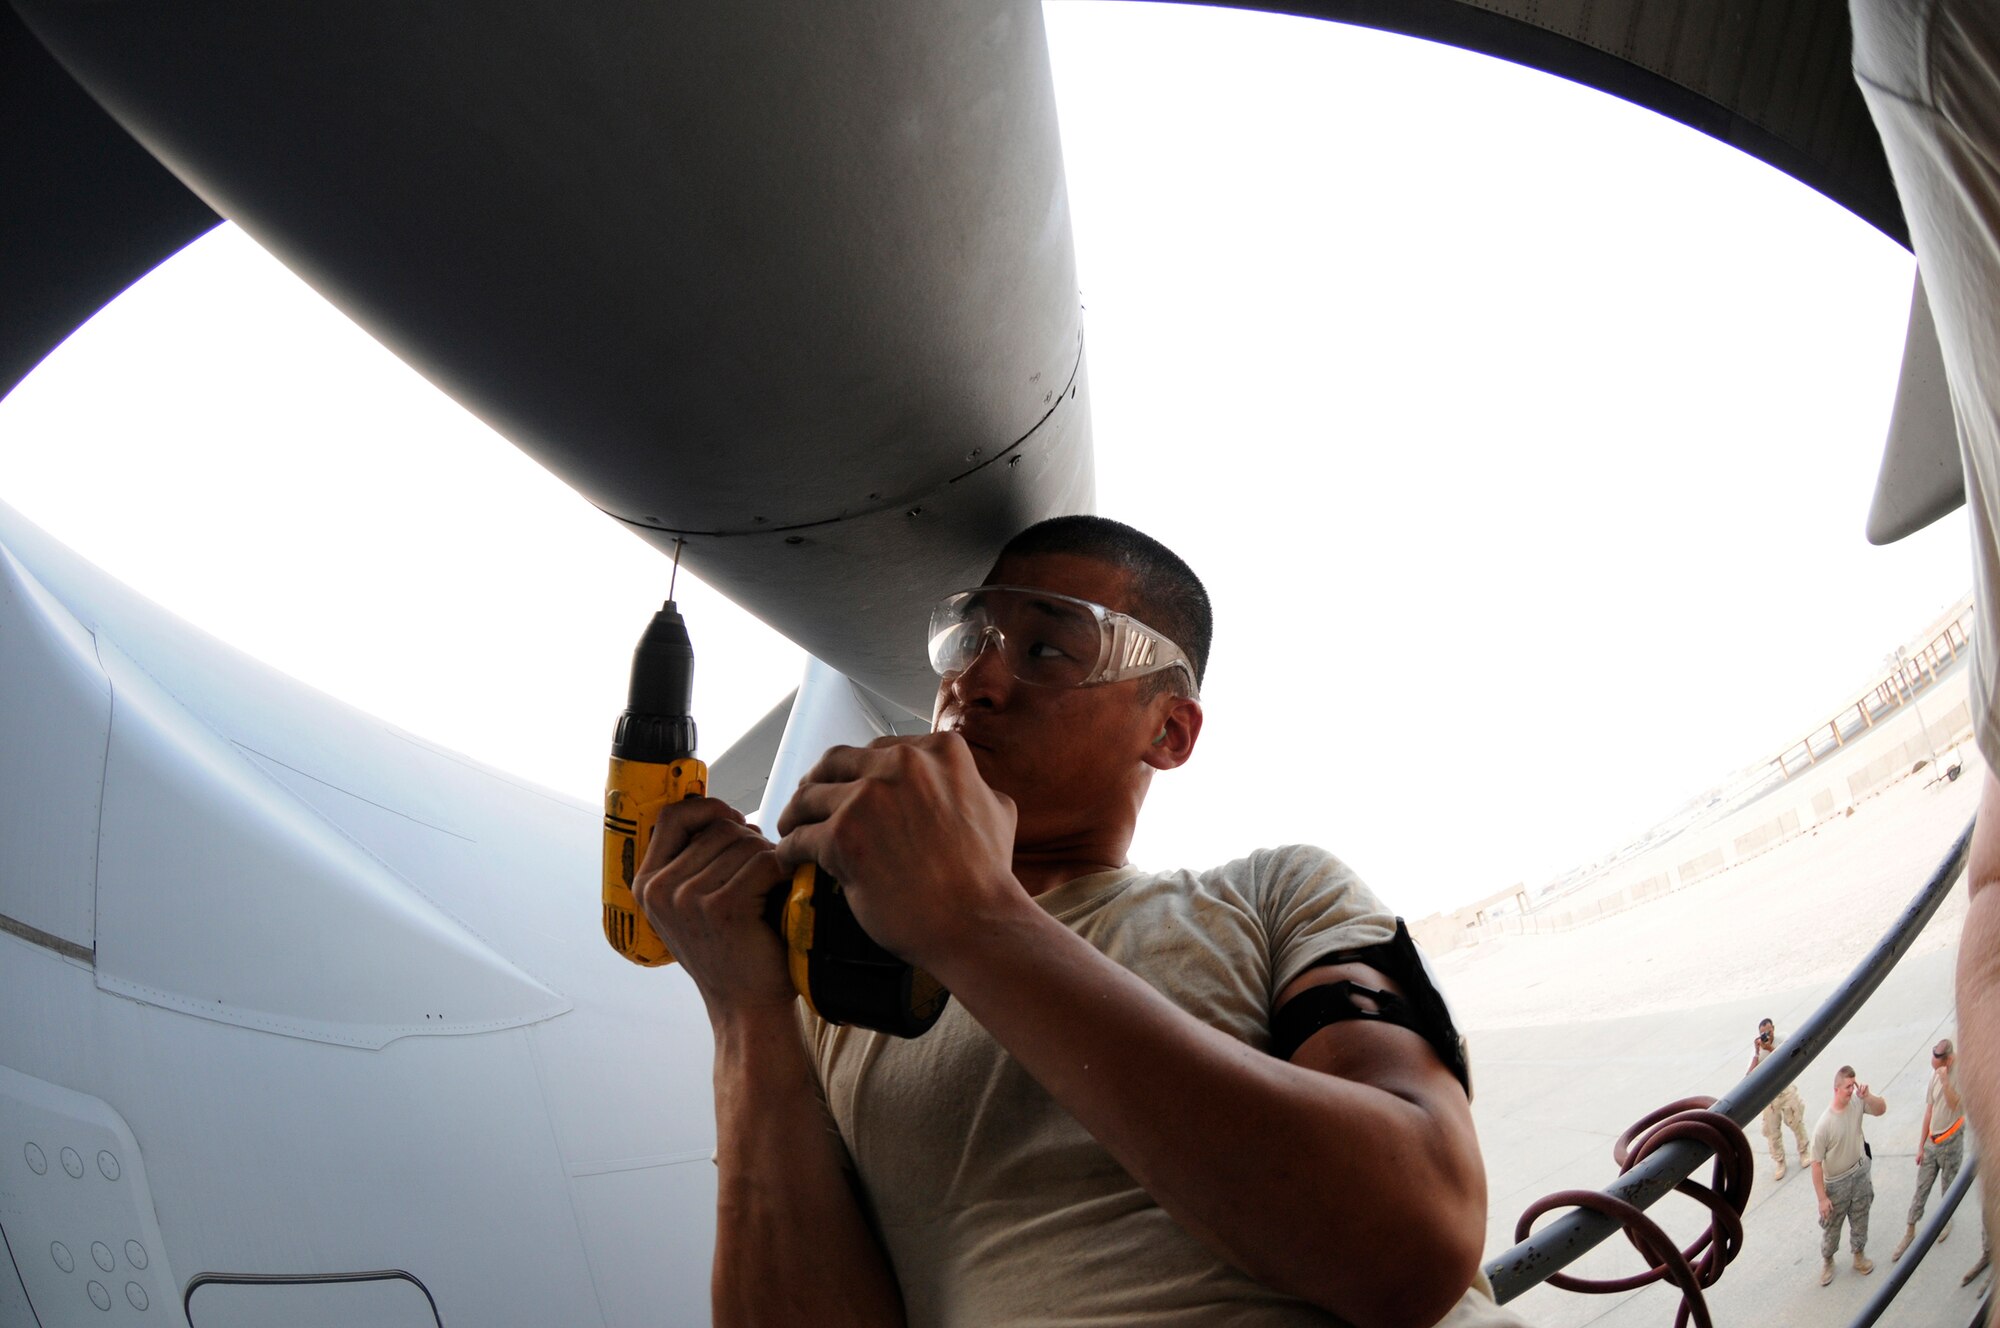 Airman 1st Class Matthew Enter, 379th Expeditionary Maintenance Squadron, puts a little muscle into drilling out a stripped screw head, October 17, 2008, at an undisclosed air base in Southwest Asia.  The bad screws are being removed so the crew chiefs can pull the panel and do maintenance on a C-17 Globemaster III.  Airman Enter, a native of Rochester, N.Y., is deployed from Fairchild Air Force Base, Wash., in support of Operations Iraqi and Enduring Freedom and Joint Task Force-Horn of Africa.  (U.S. Air Force photo by Tech. Sgt. Michael Boquette/Released)